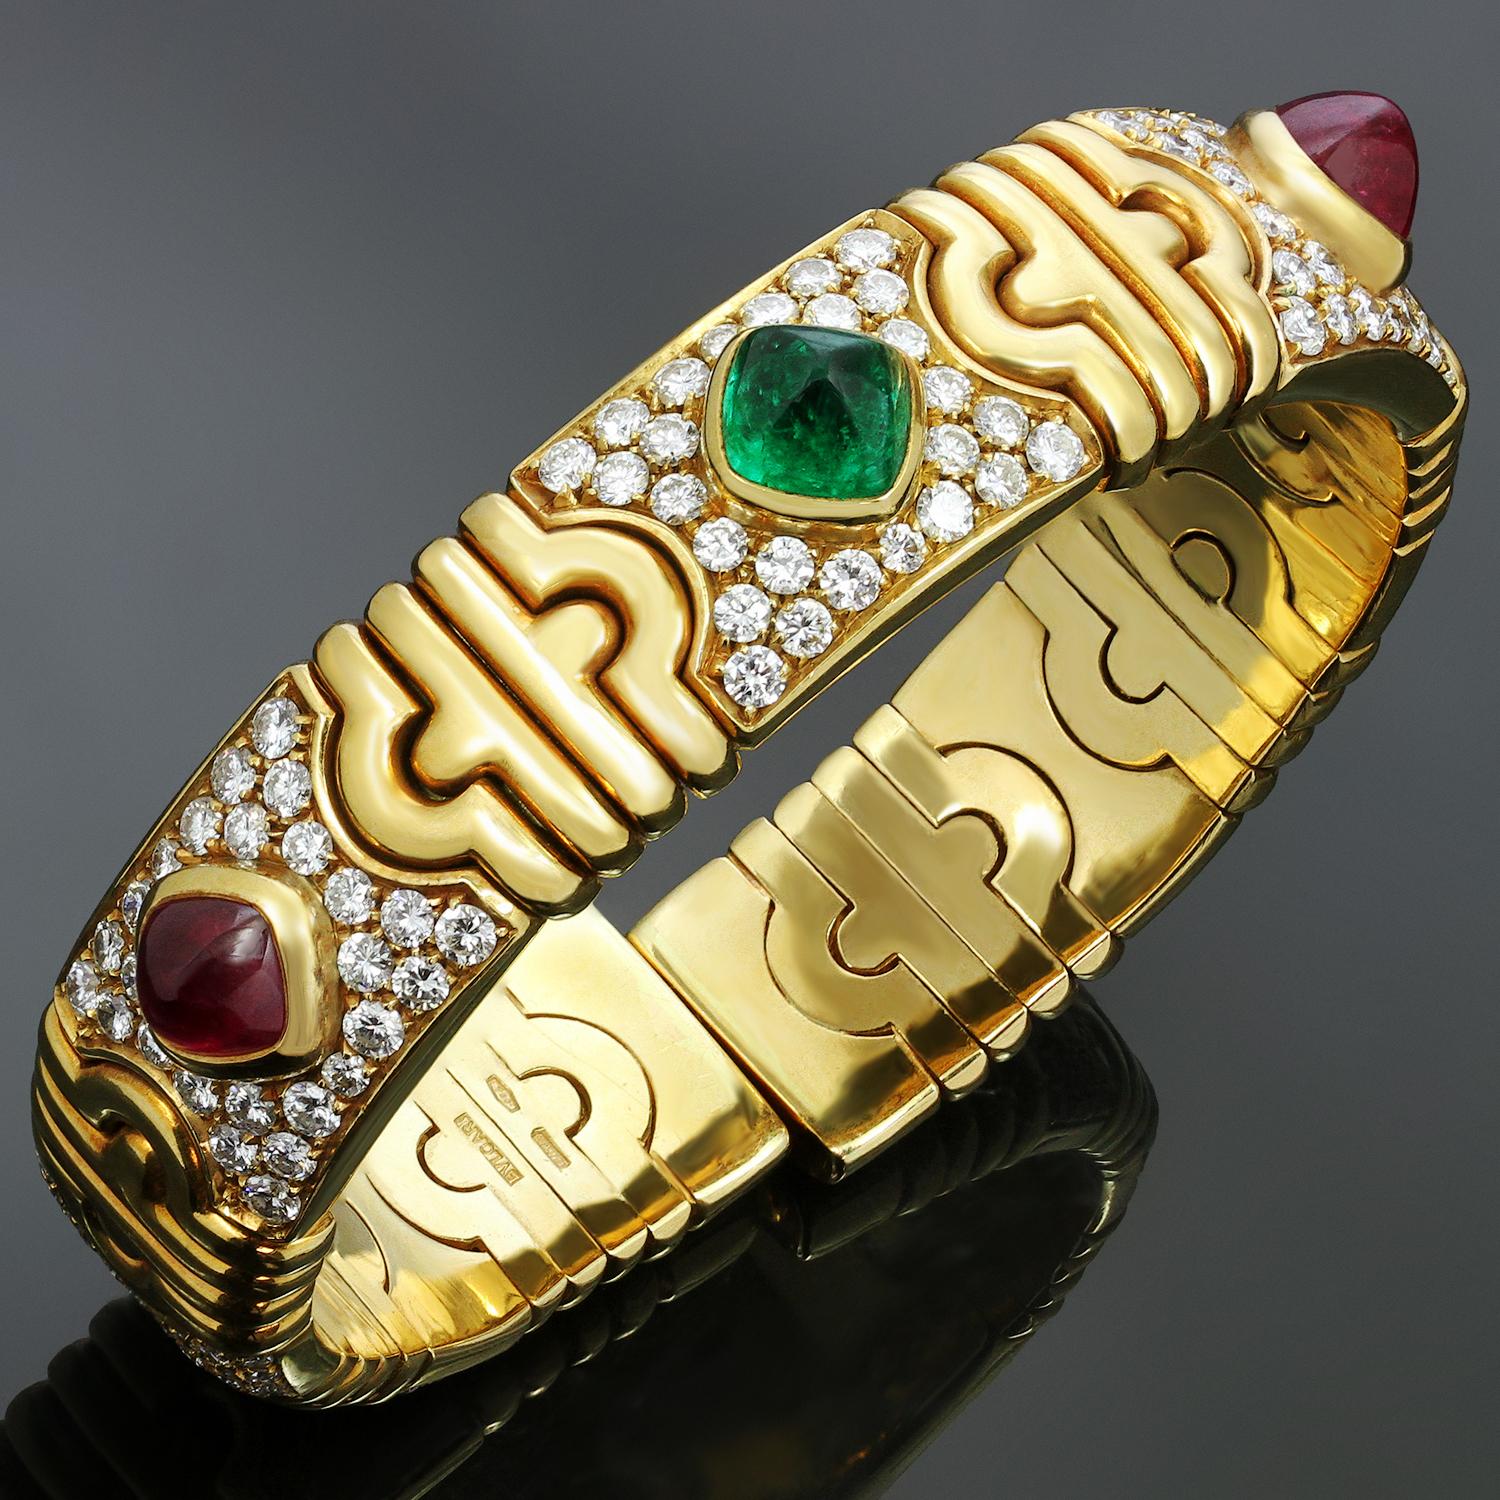 This fabulous Bulgari bracelet from the iconic Parentesi collection is crafted in 18k yellow gold and set with sugarloaf-cut cabochon emerald and rubies, in traparent bright crispy colors, and brilliant-cut round diamonds of an estimated 5.50